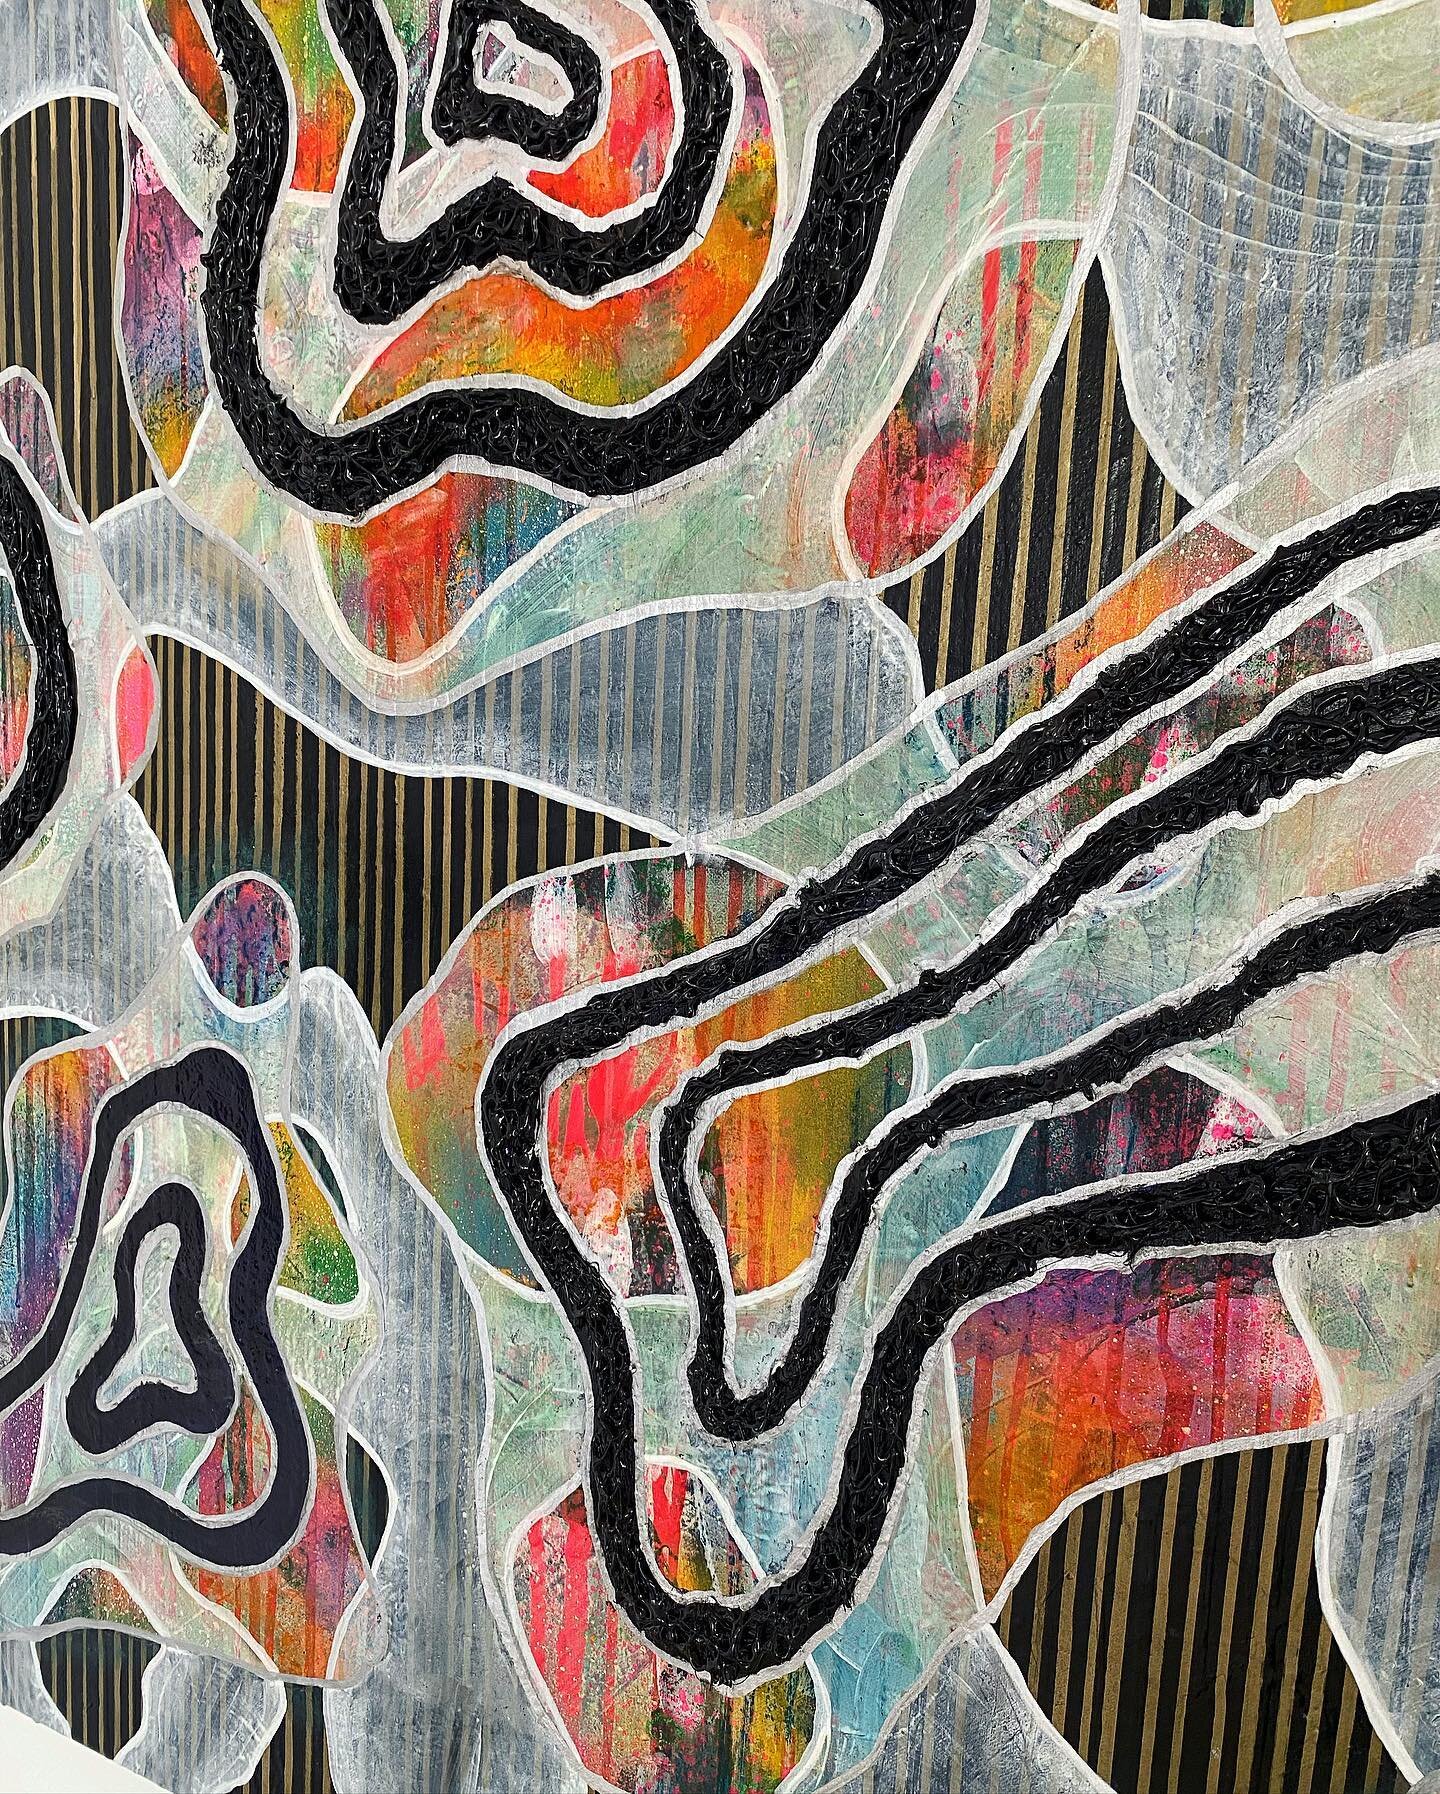 Close up details of Symbiotic, available to purchase for $1,650 || Mixed media on canvas, 152.5cm x 101.5cm, 2022